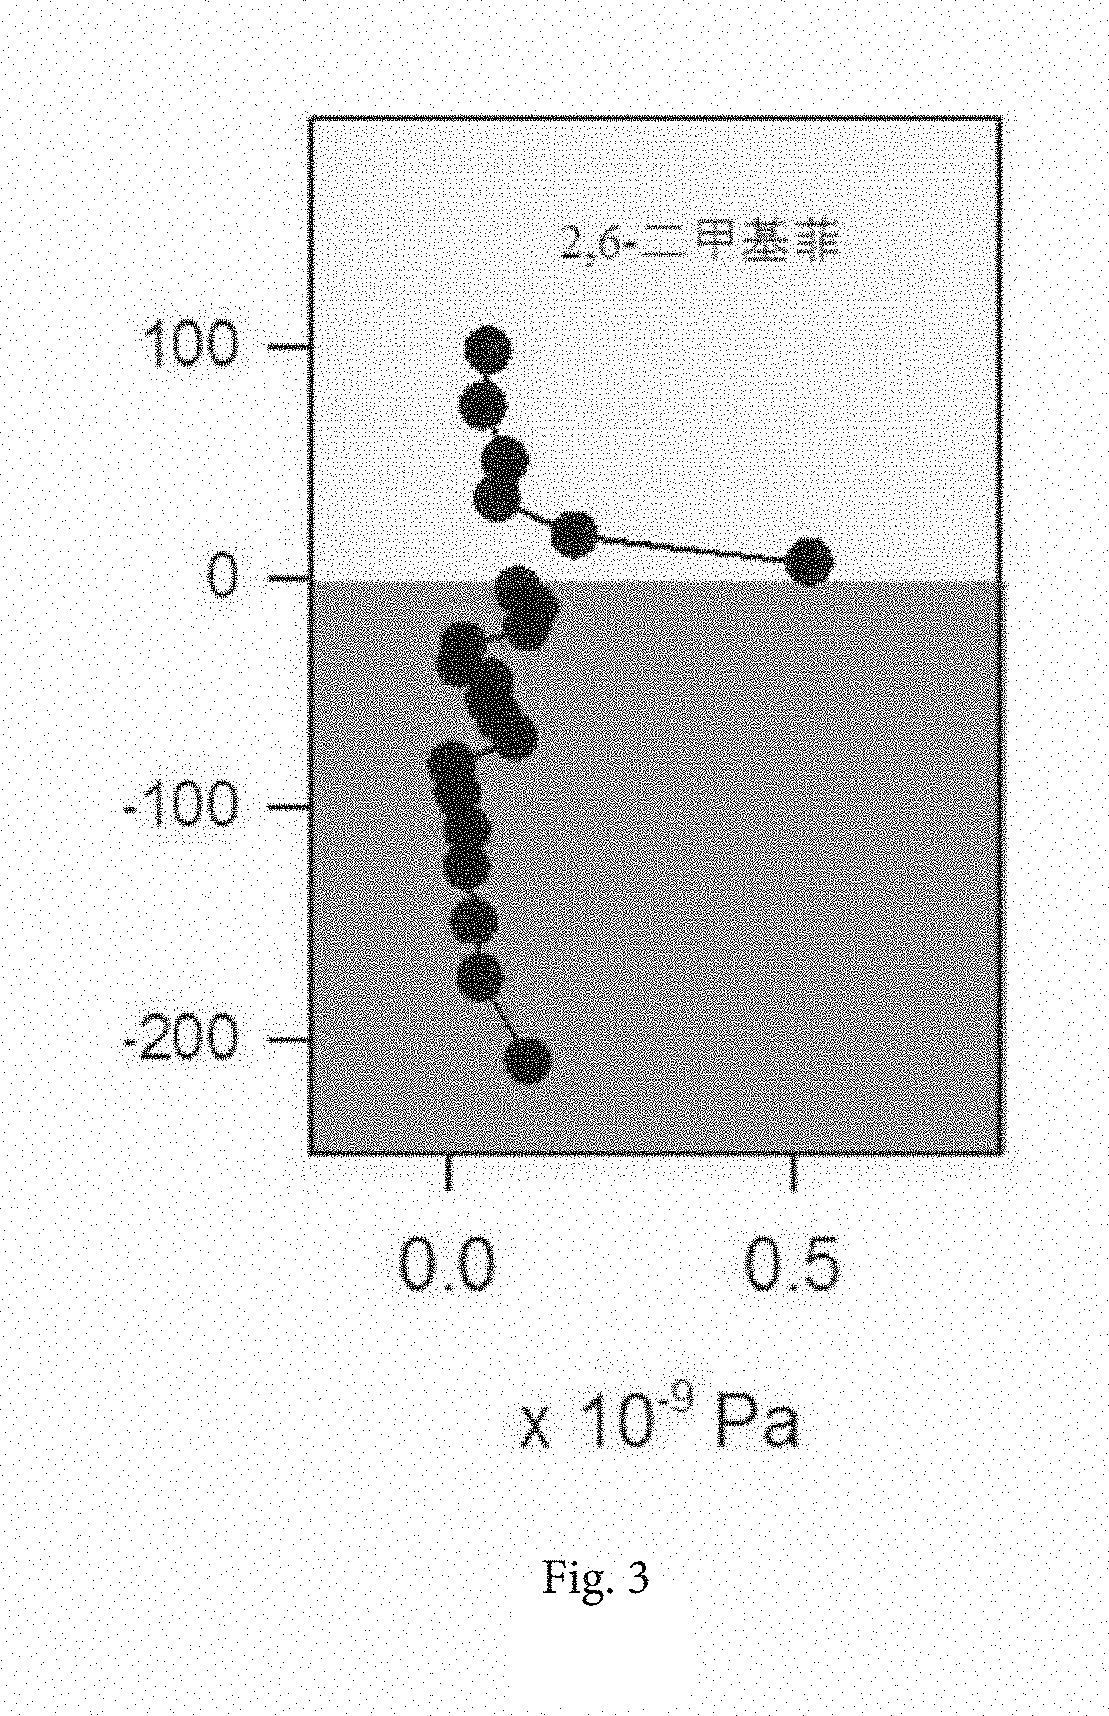 Air-water interface flux detection method